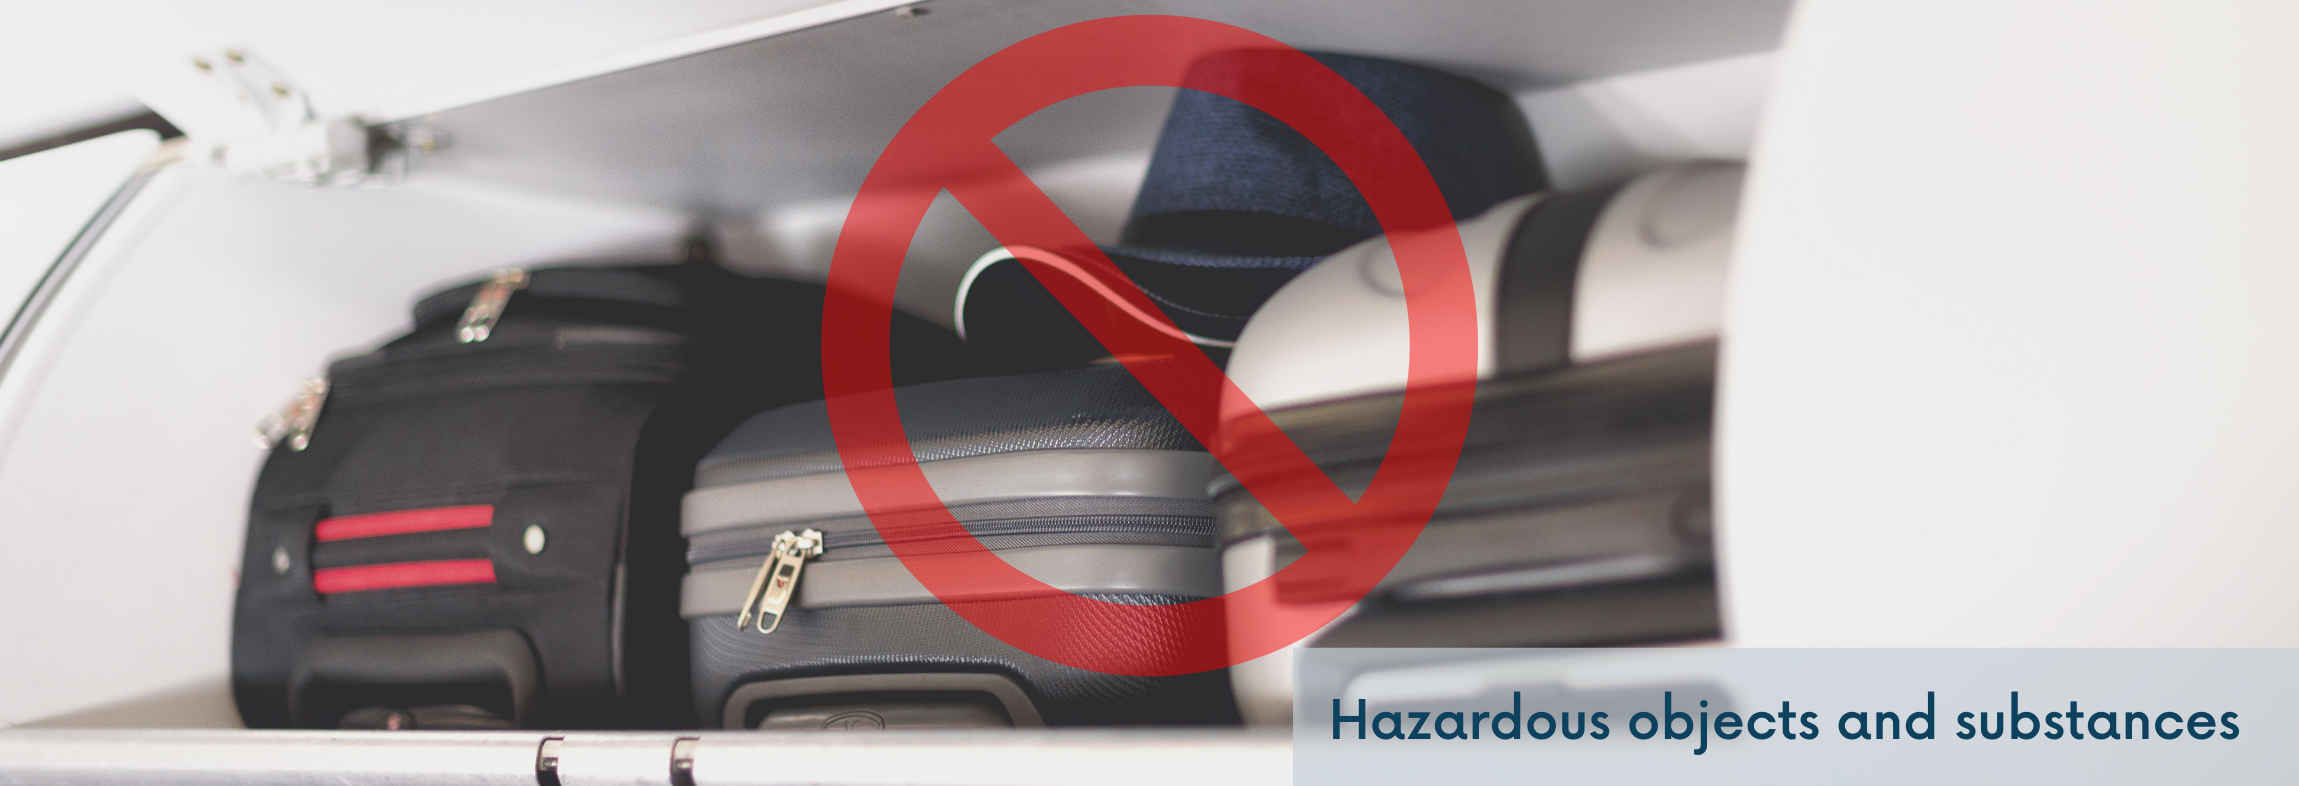 Check your luggage for dangerous goods